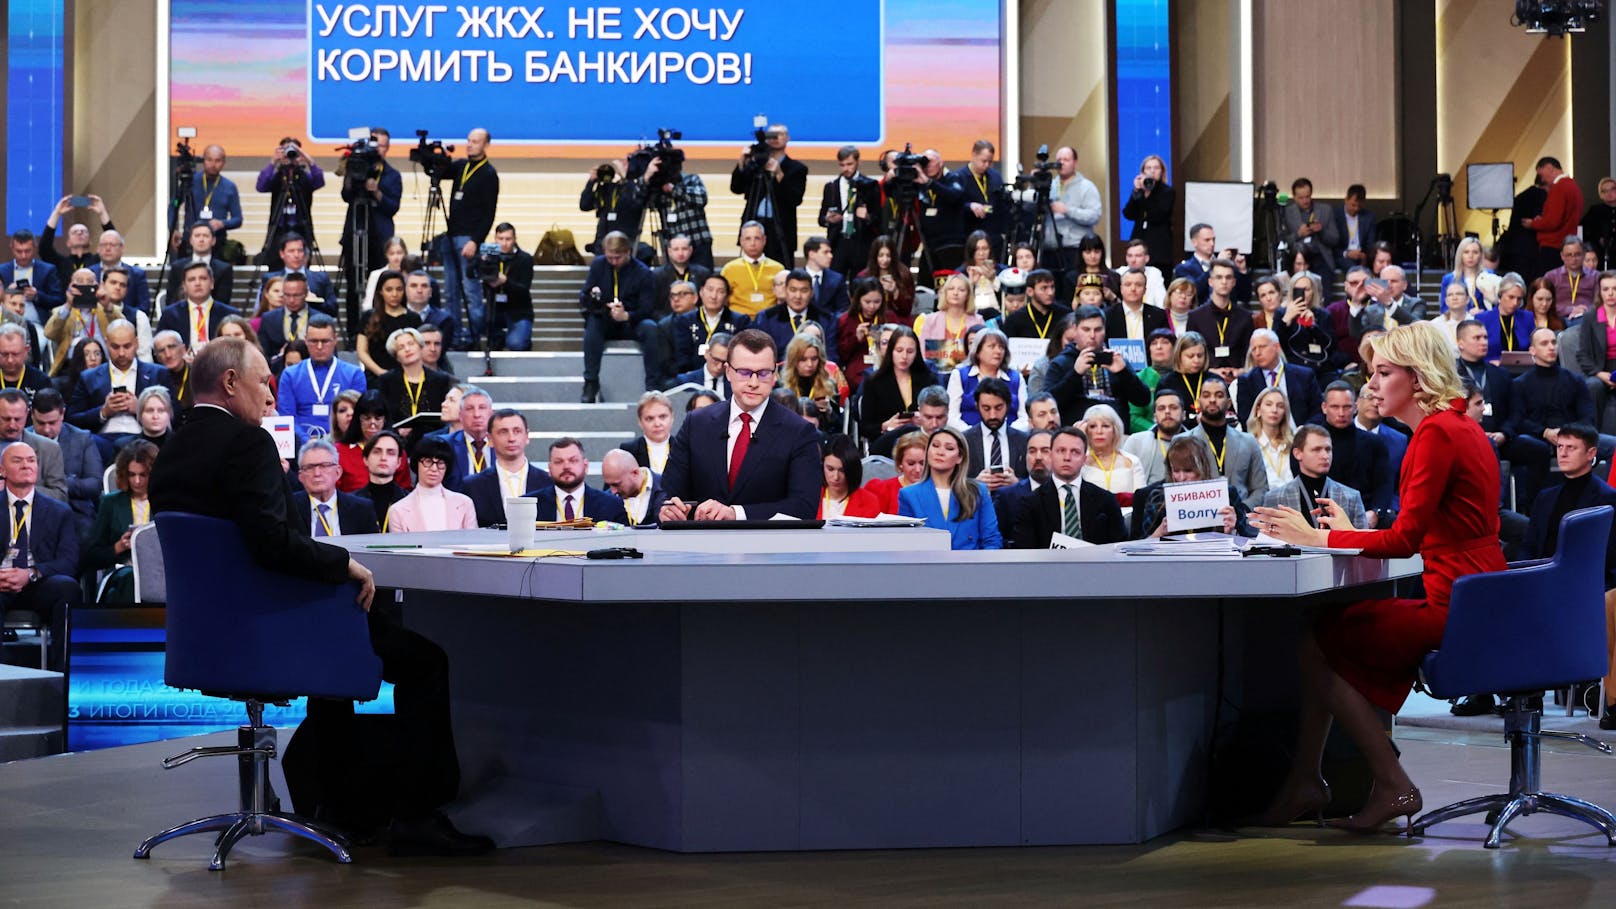 Russian President Vladimir Putin attends his annual end-of-year press conference and the Direct Line question and answer session, at Gostiny Dvor Exhibition Centre in Moscow, Russia December 14, 2023. Sputnik/Mikhail Klimentyev/Kremlin via REUTERS ATTENTION EDITORS - THIS IMAGE WAS PROVIDED BY A THIRD PARTY.